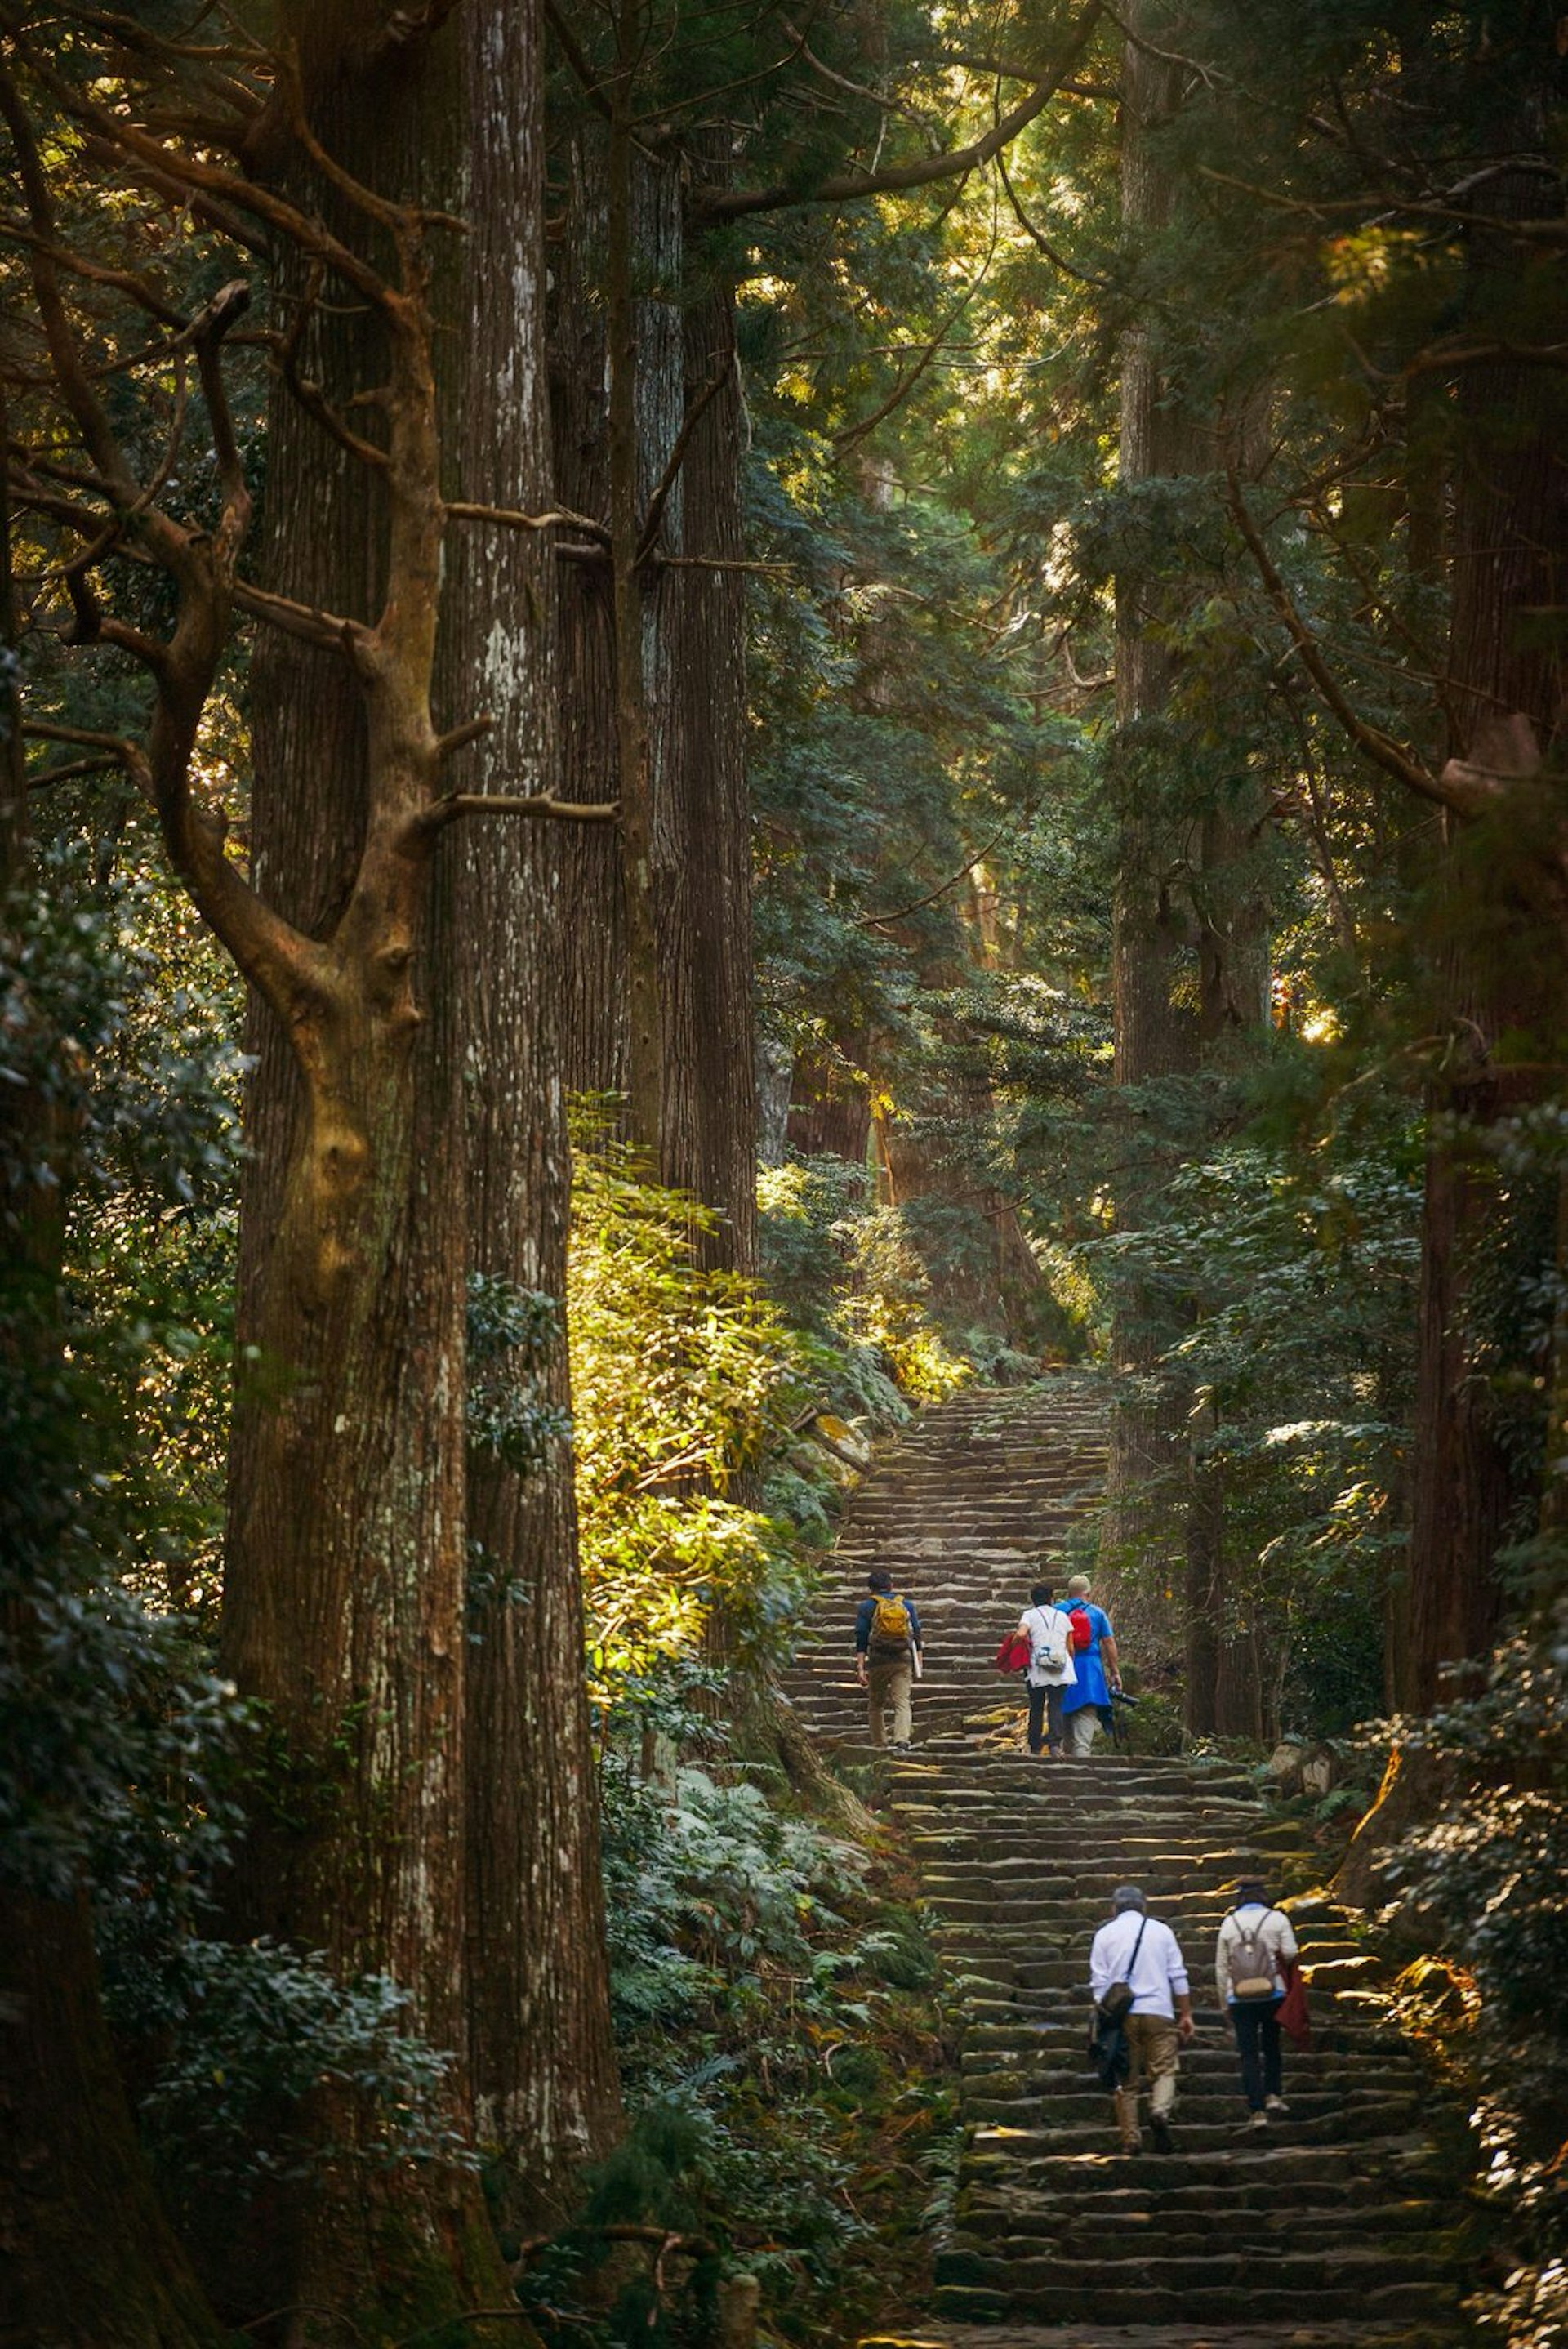 Walkers climb Daimon-zaka's 267 steps, which are lined with cedar trees